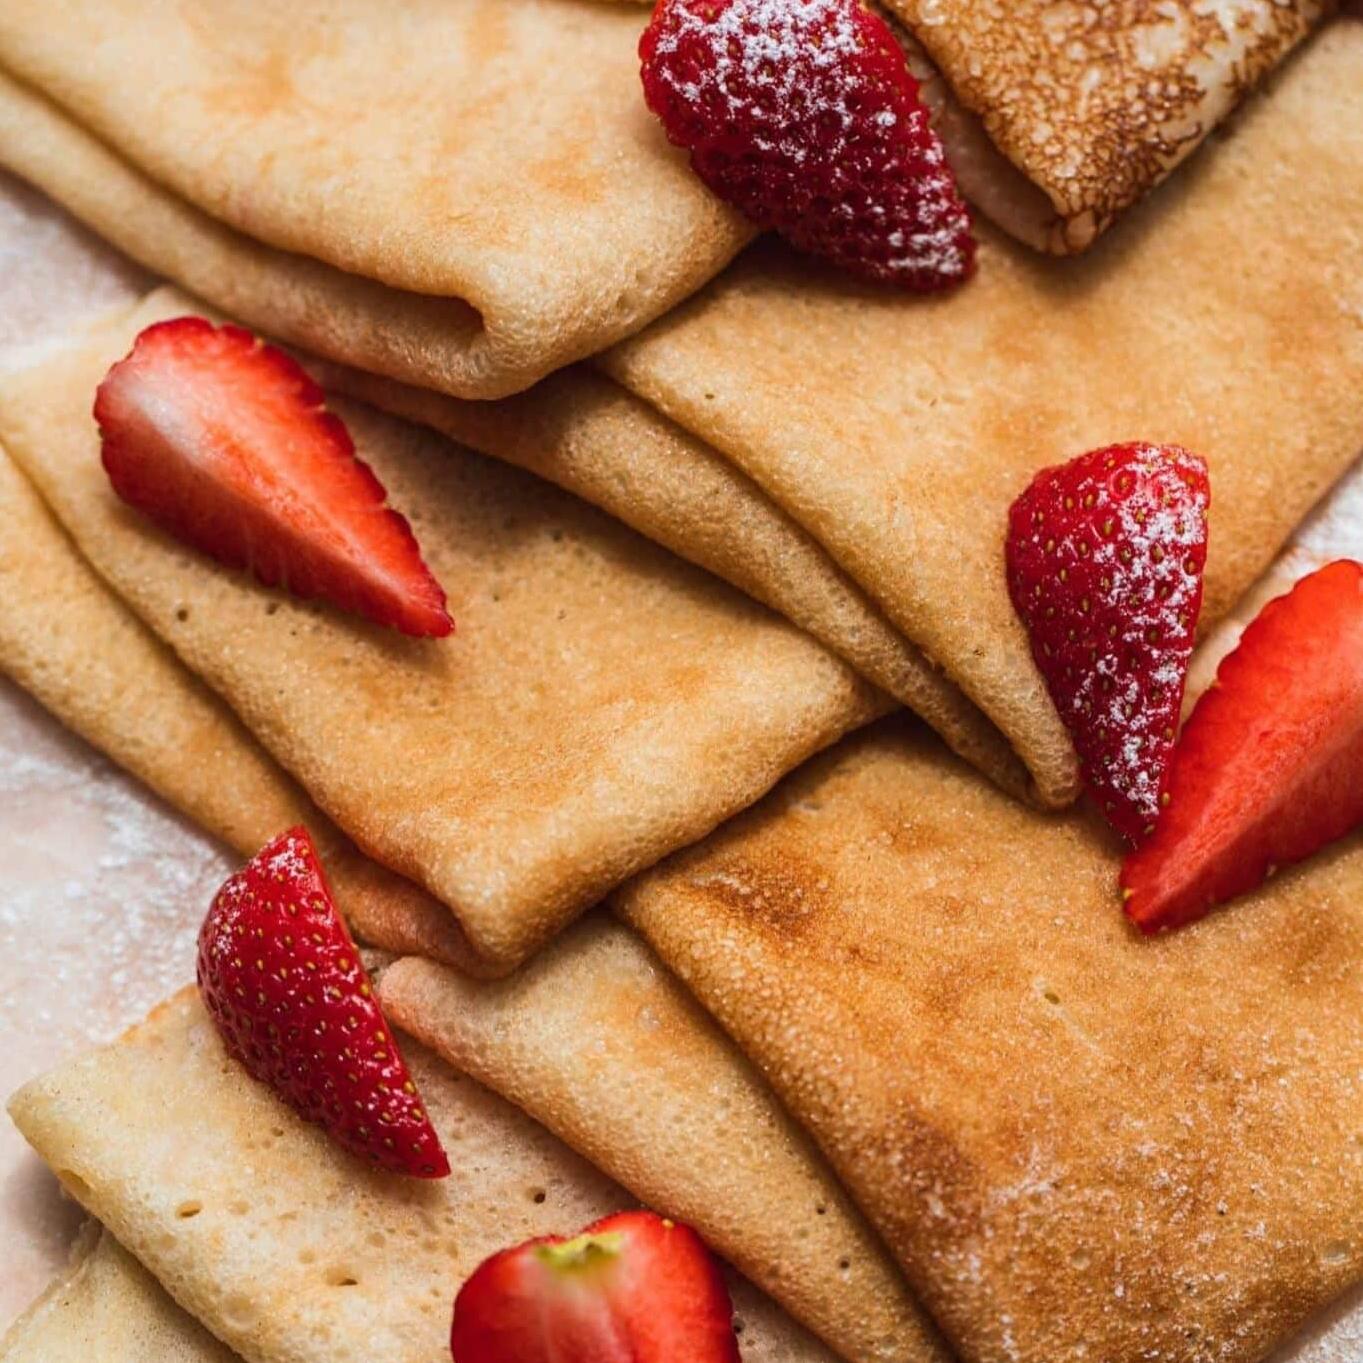  A delicate and tender crepe that's vegan and delicious - a perfect breakfast treat for everyone!